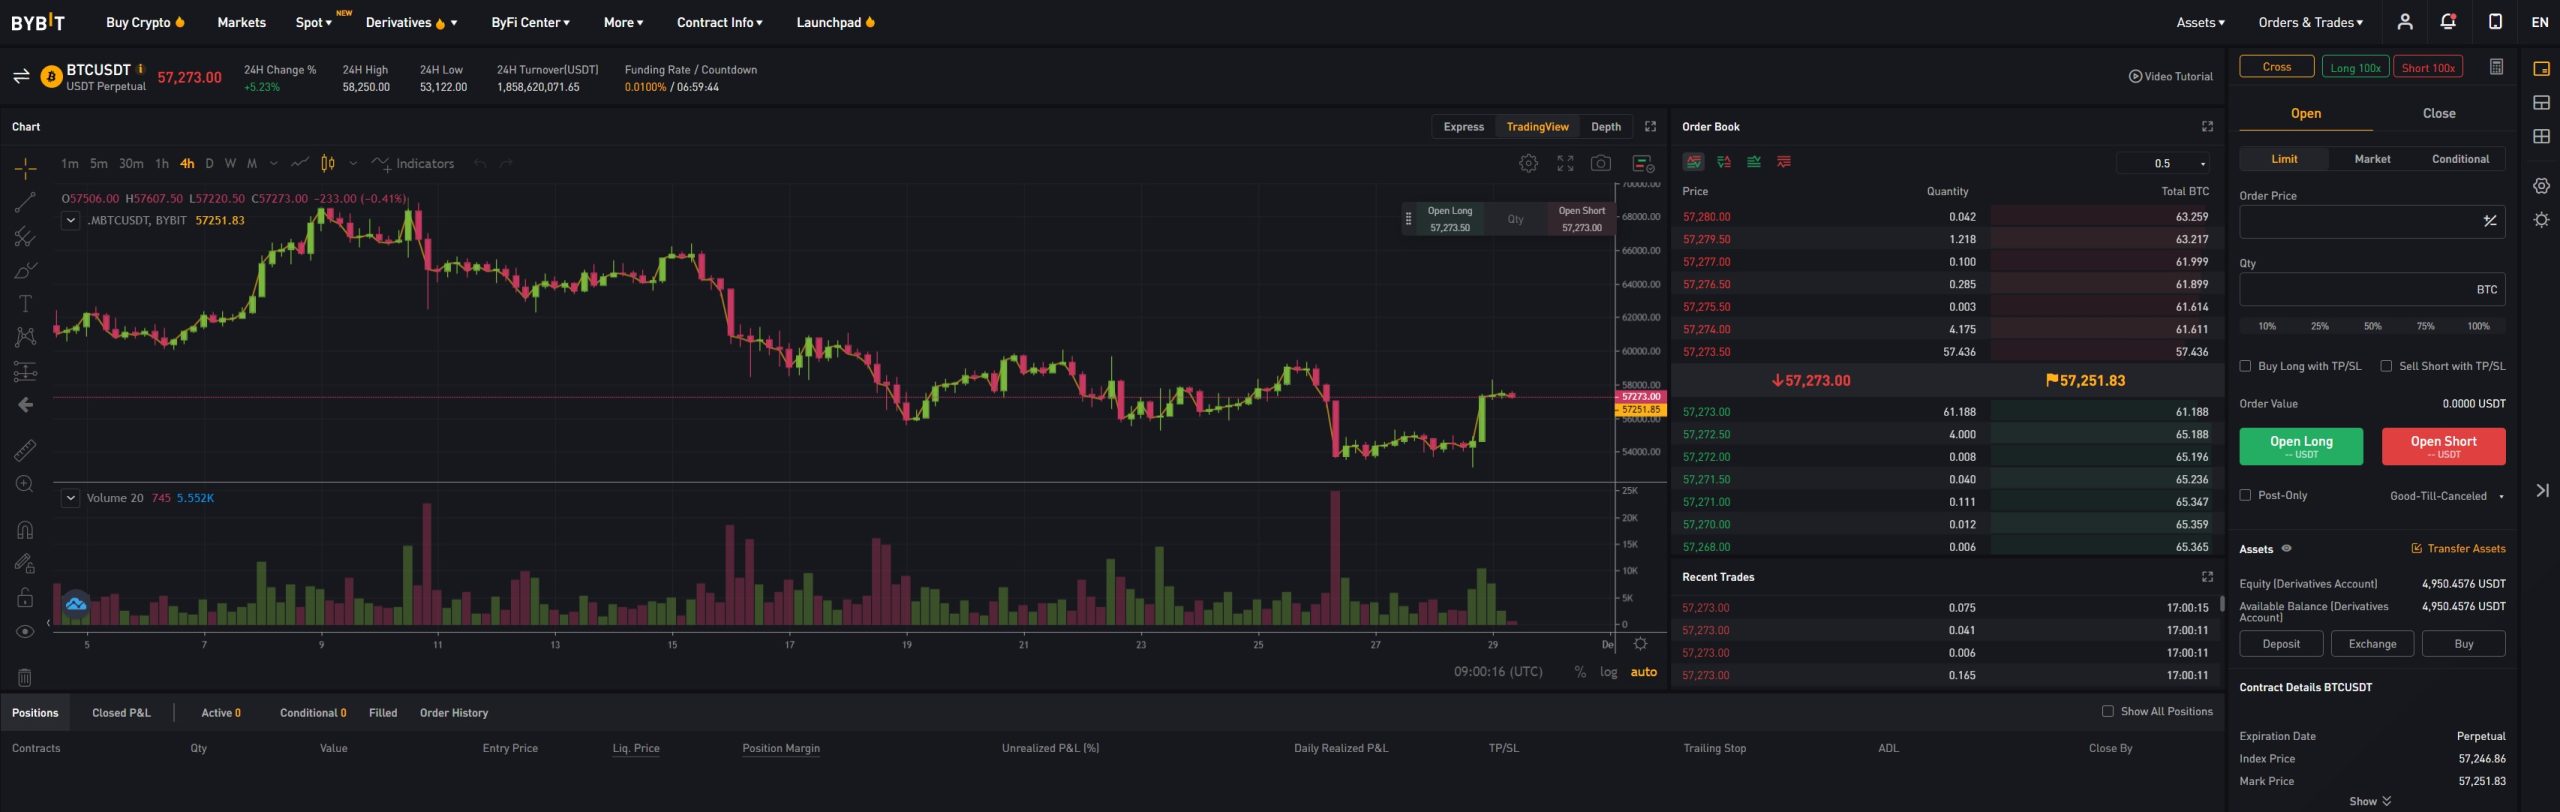 Bybit charting interface